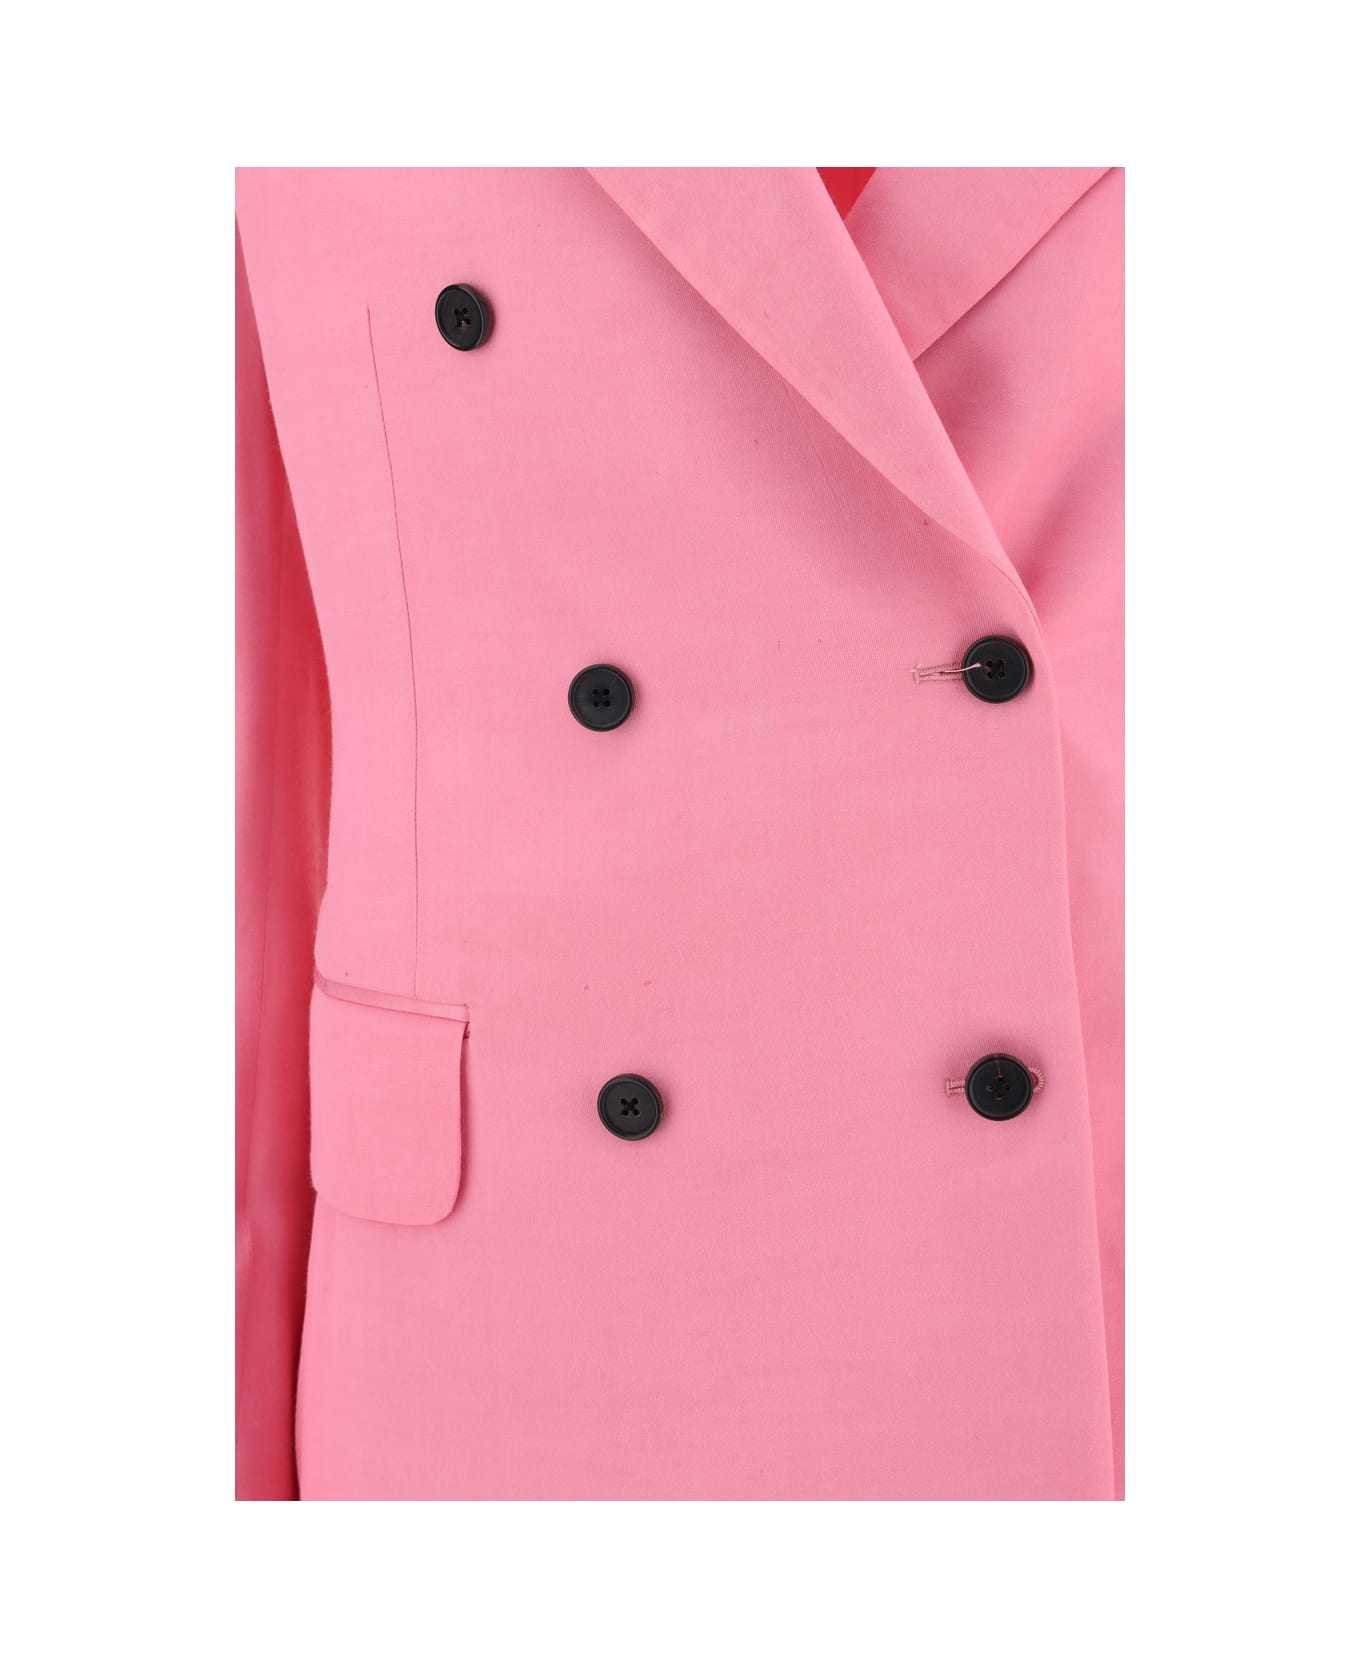 Tom Ford Double-breasted Blazer - Pink ブレザー